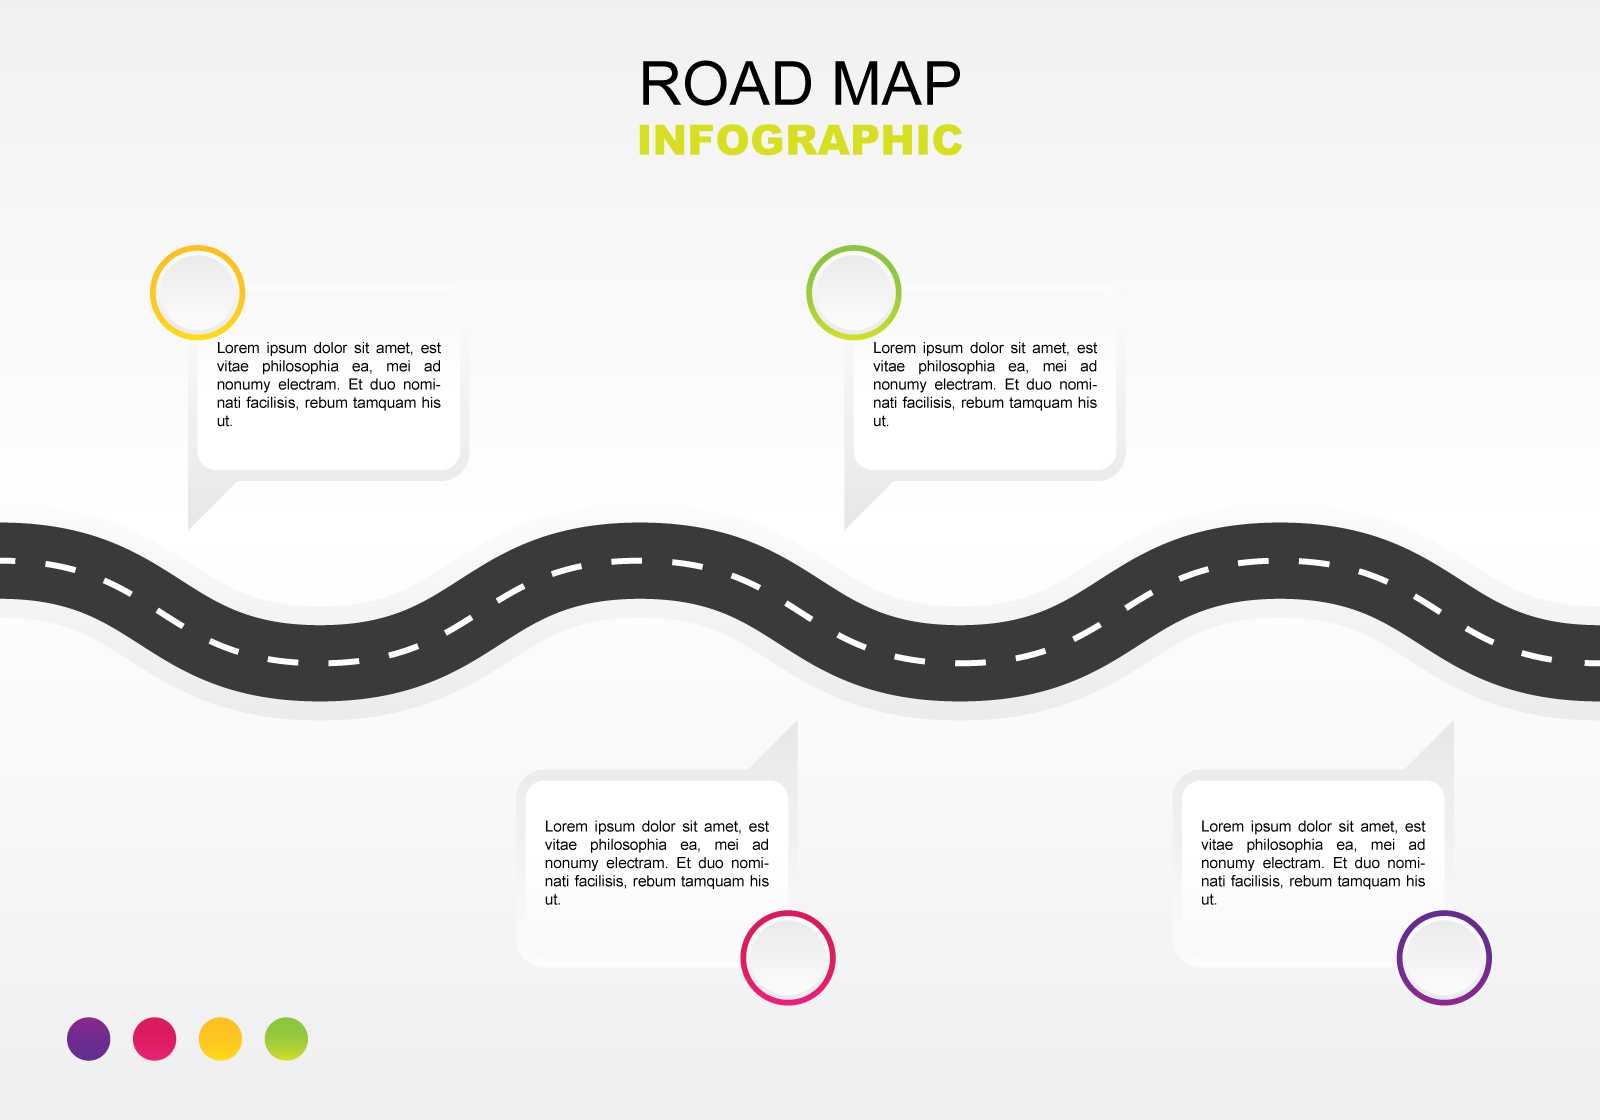 Blank Road Map Template Best Professional Templates